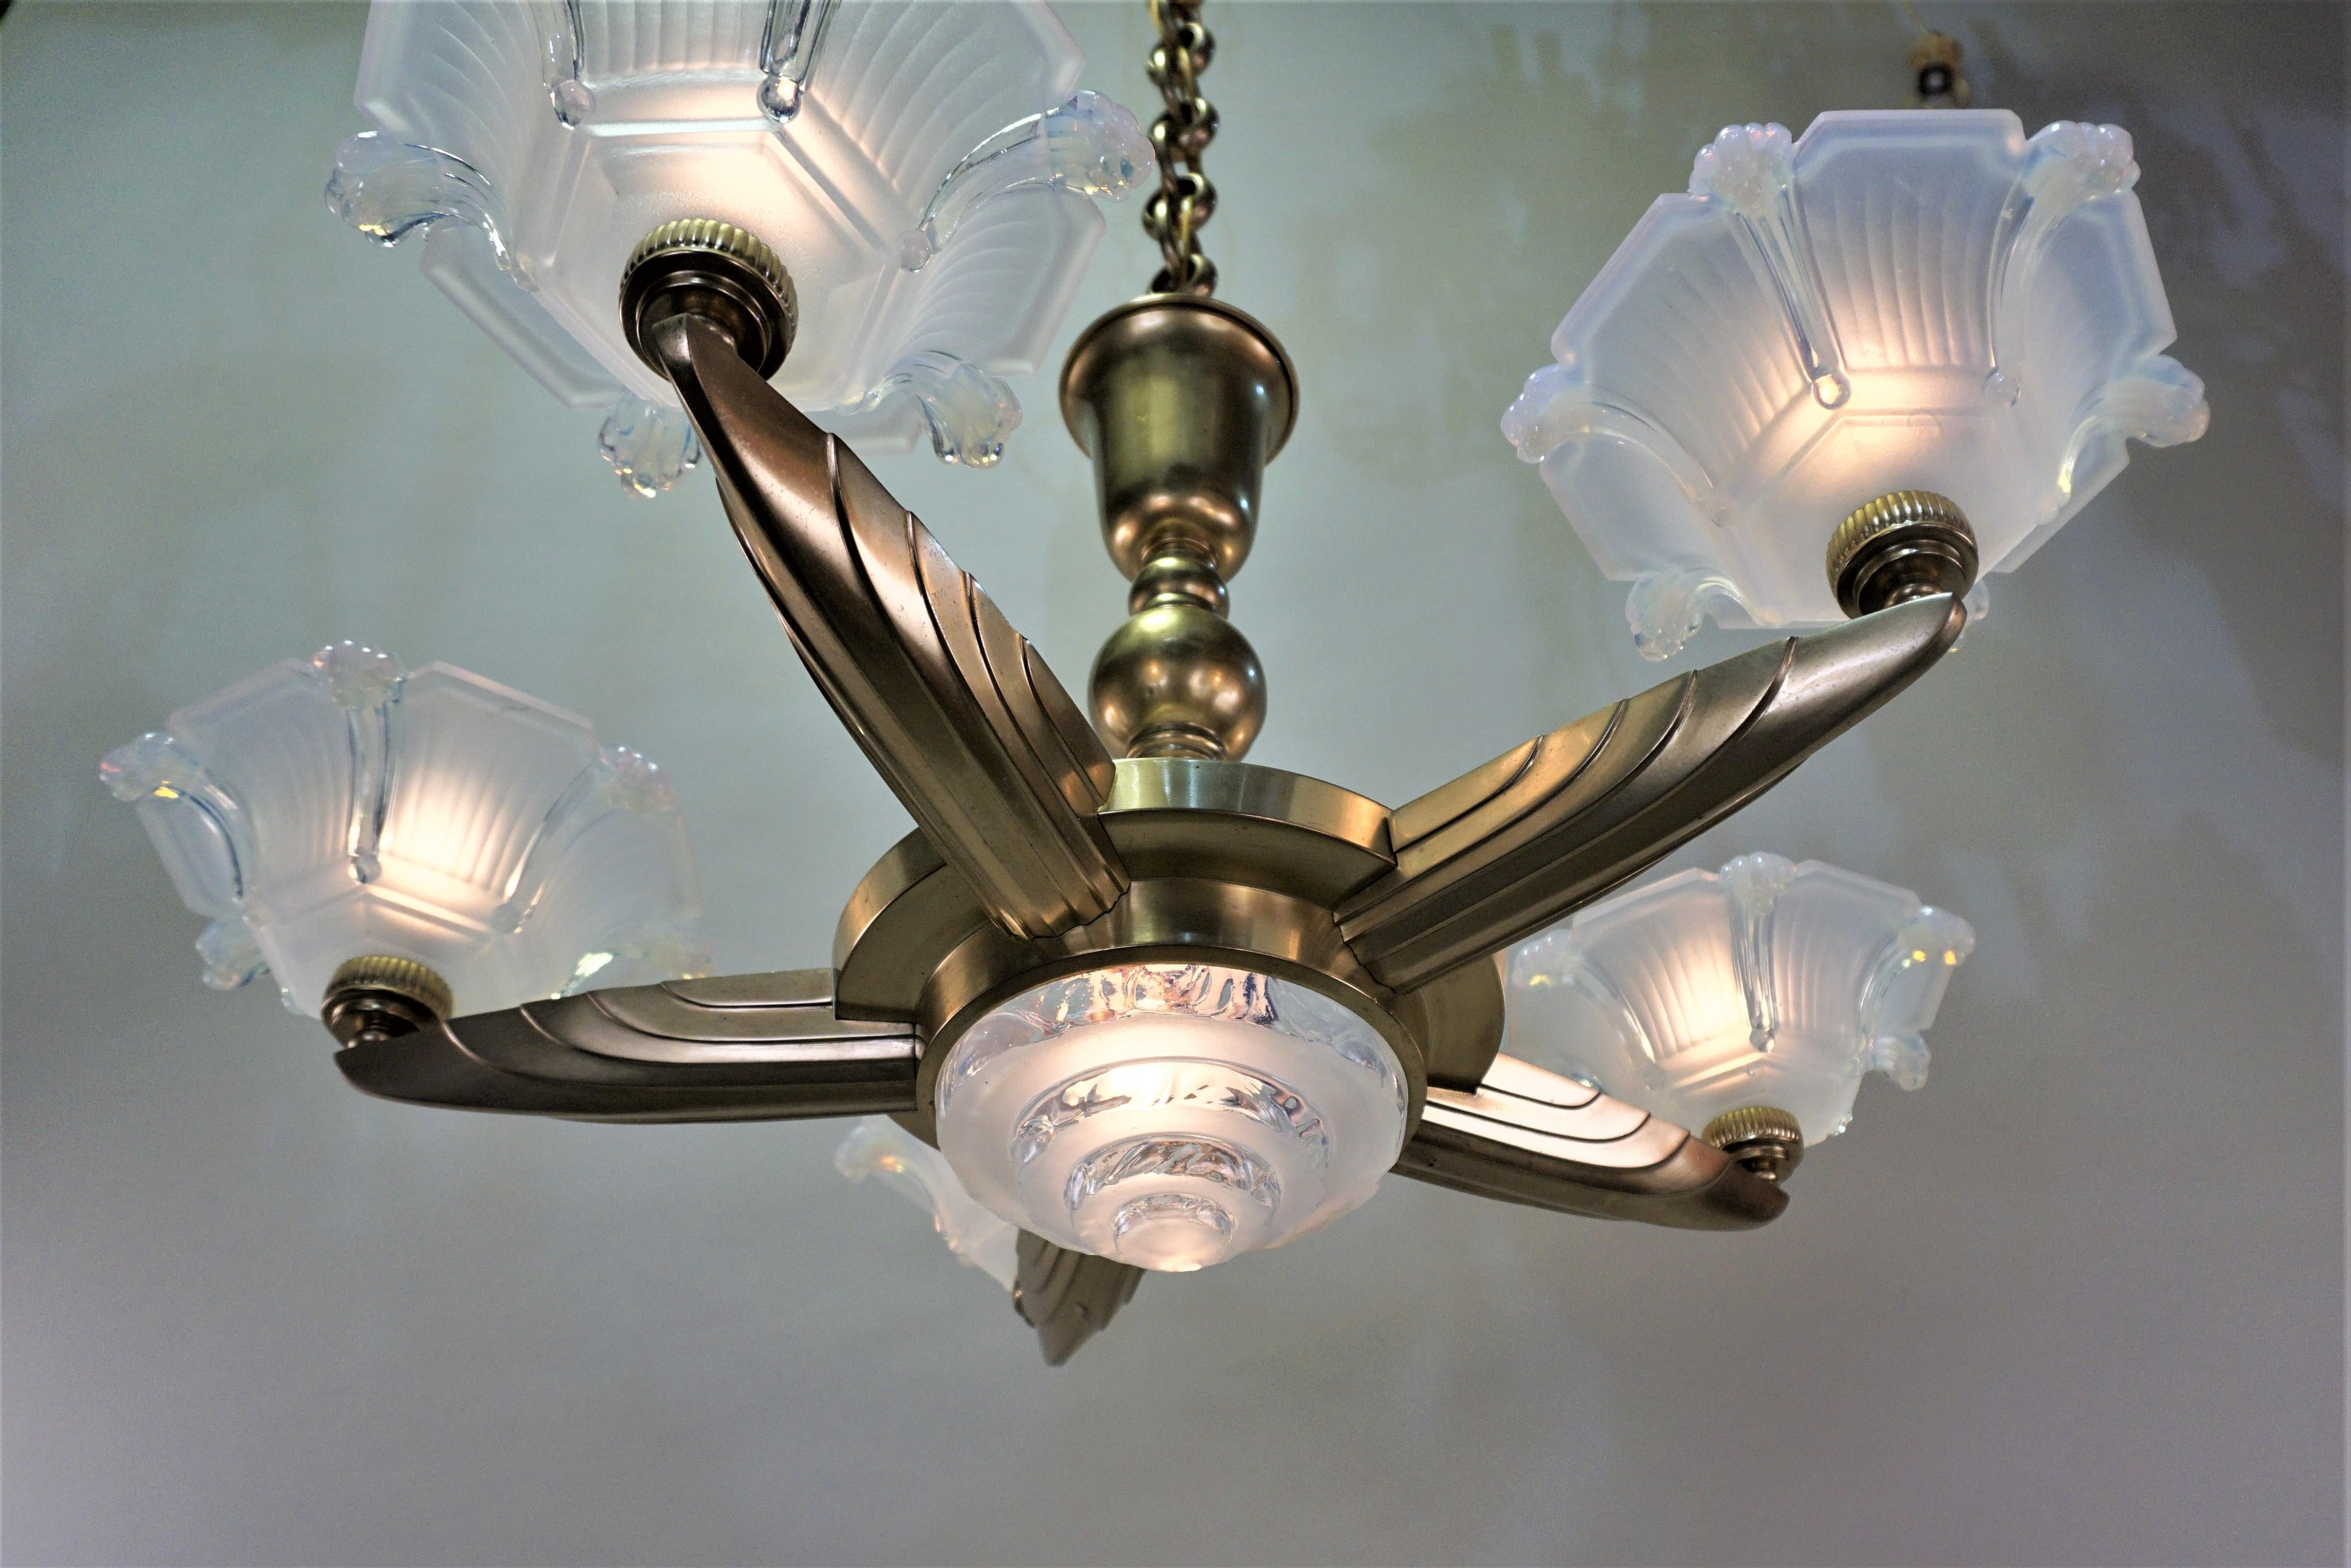 Mid-20th Century French 1930s Art Deco Bronze and Glass Chandelier by Ezan & Petitot